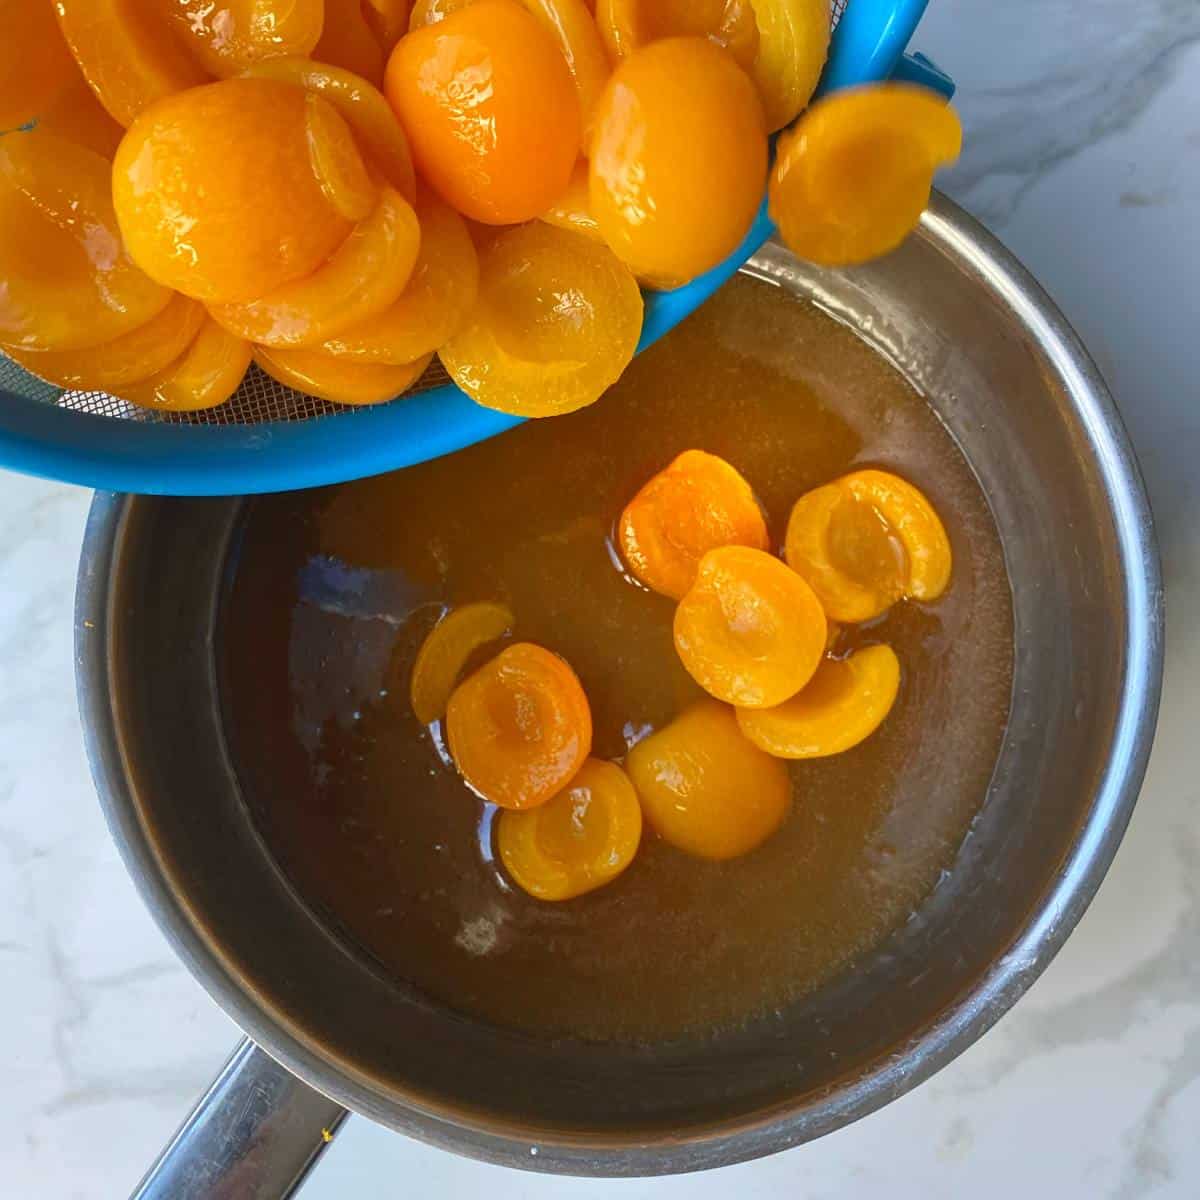 Drained apricots being poured into the sugar syrup